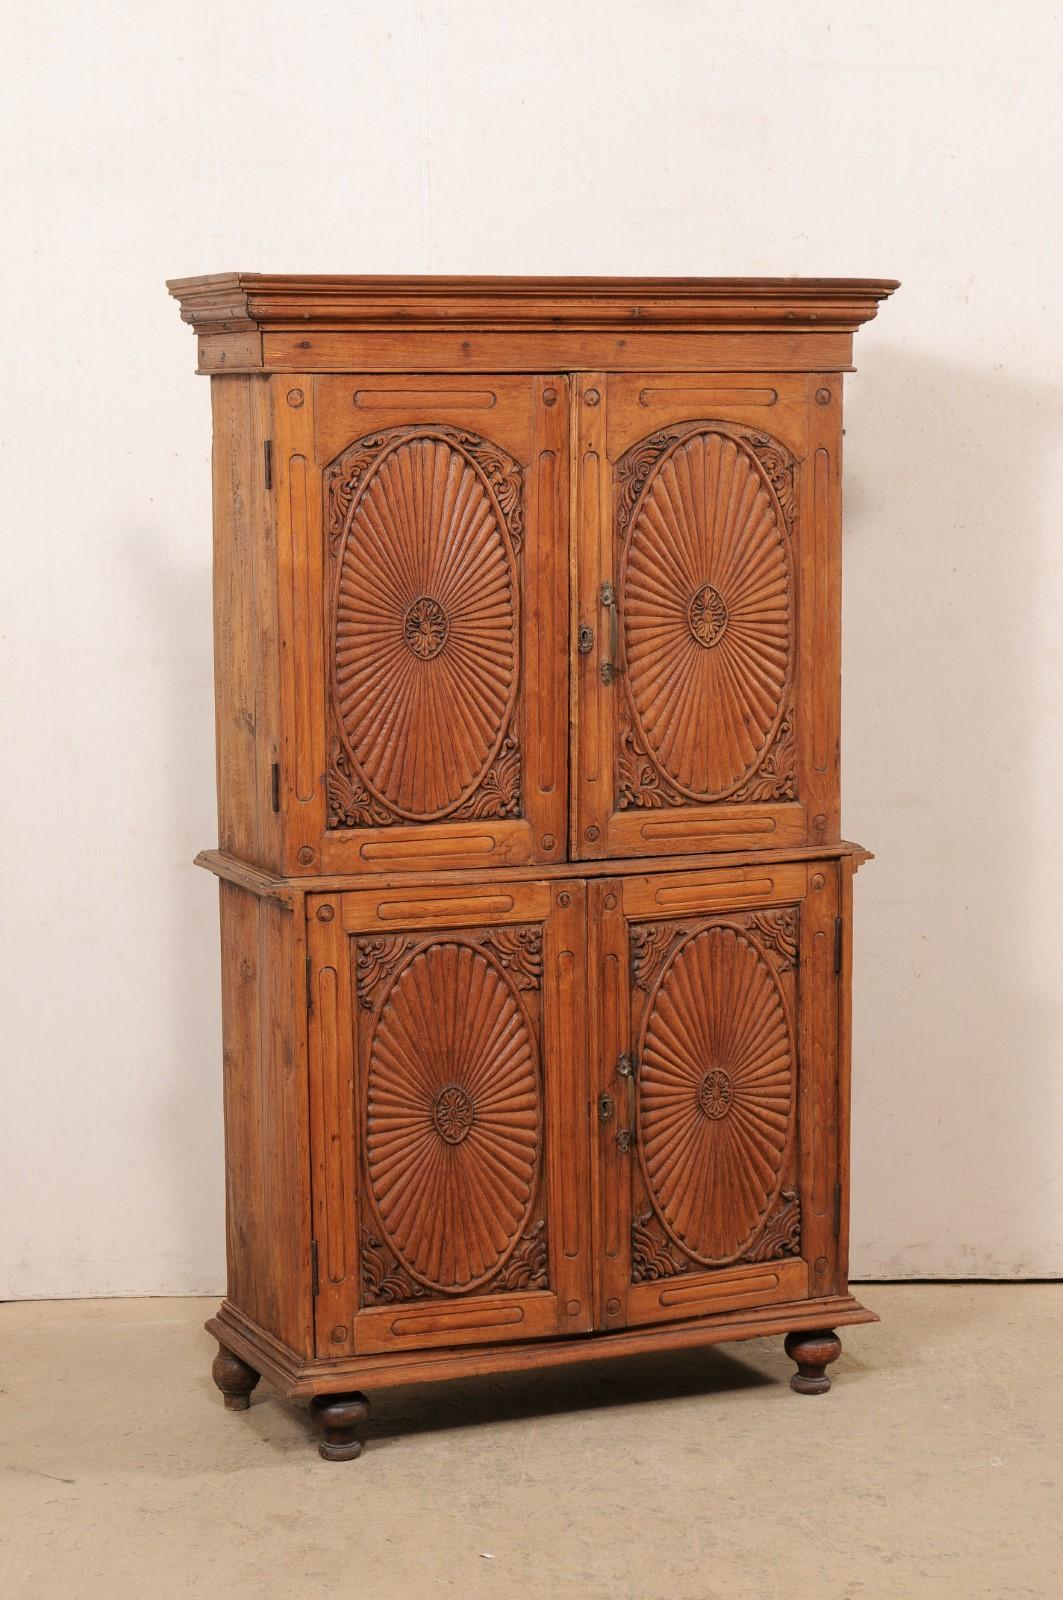 A tall British Colonial carved-teak wood cabinet from the 19th century. This pair of antique Anglo-Indian cabinets each feature a nicely molded cornice atop two stacked-pair of beautifully-carved, raised panel doors (four doors in total), which open